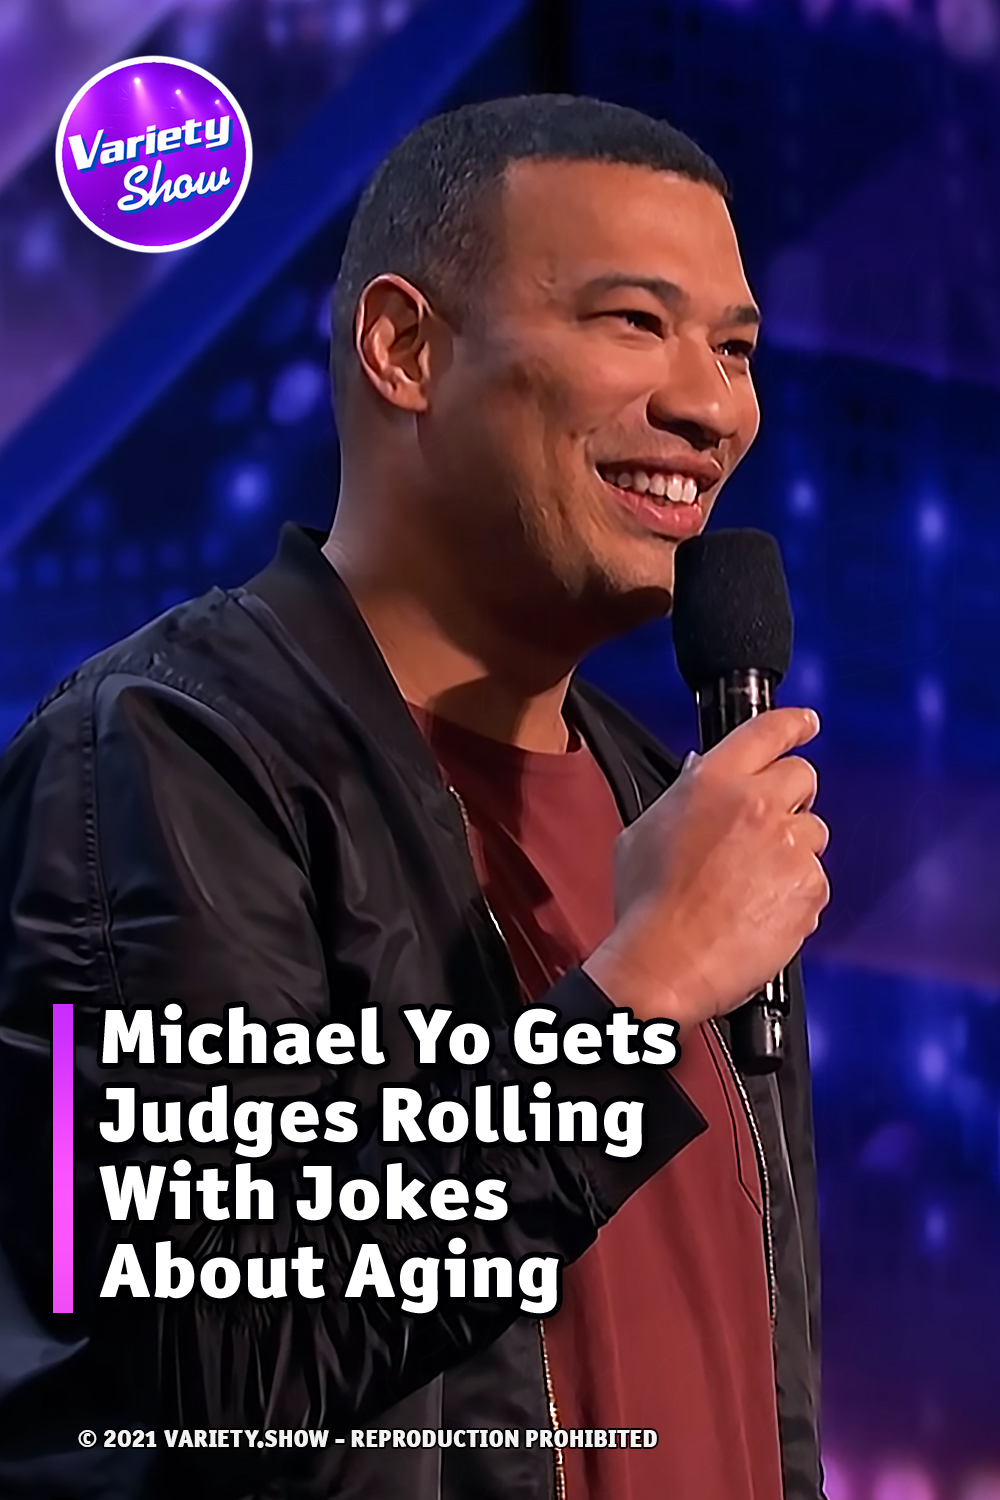 Michael Yo Gets Judges Rolling With Jokes About Aging